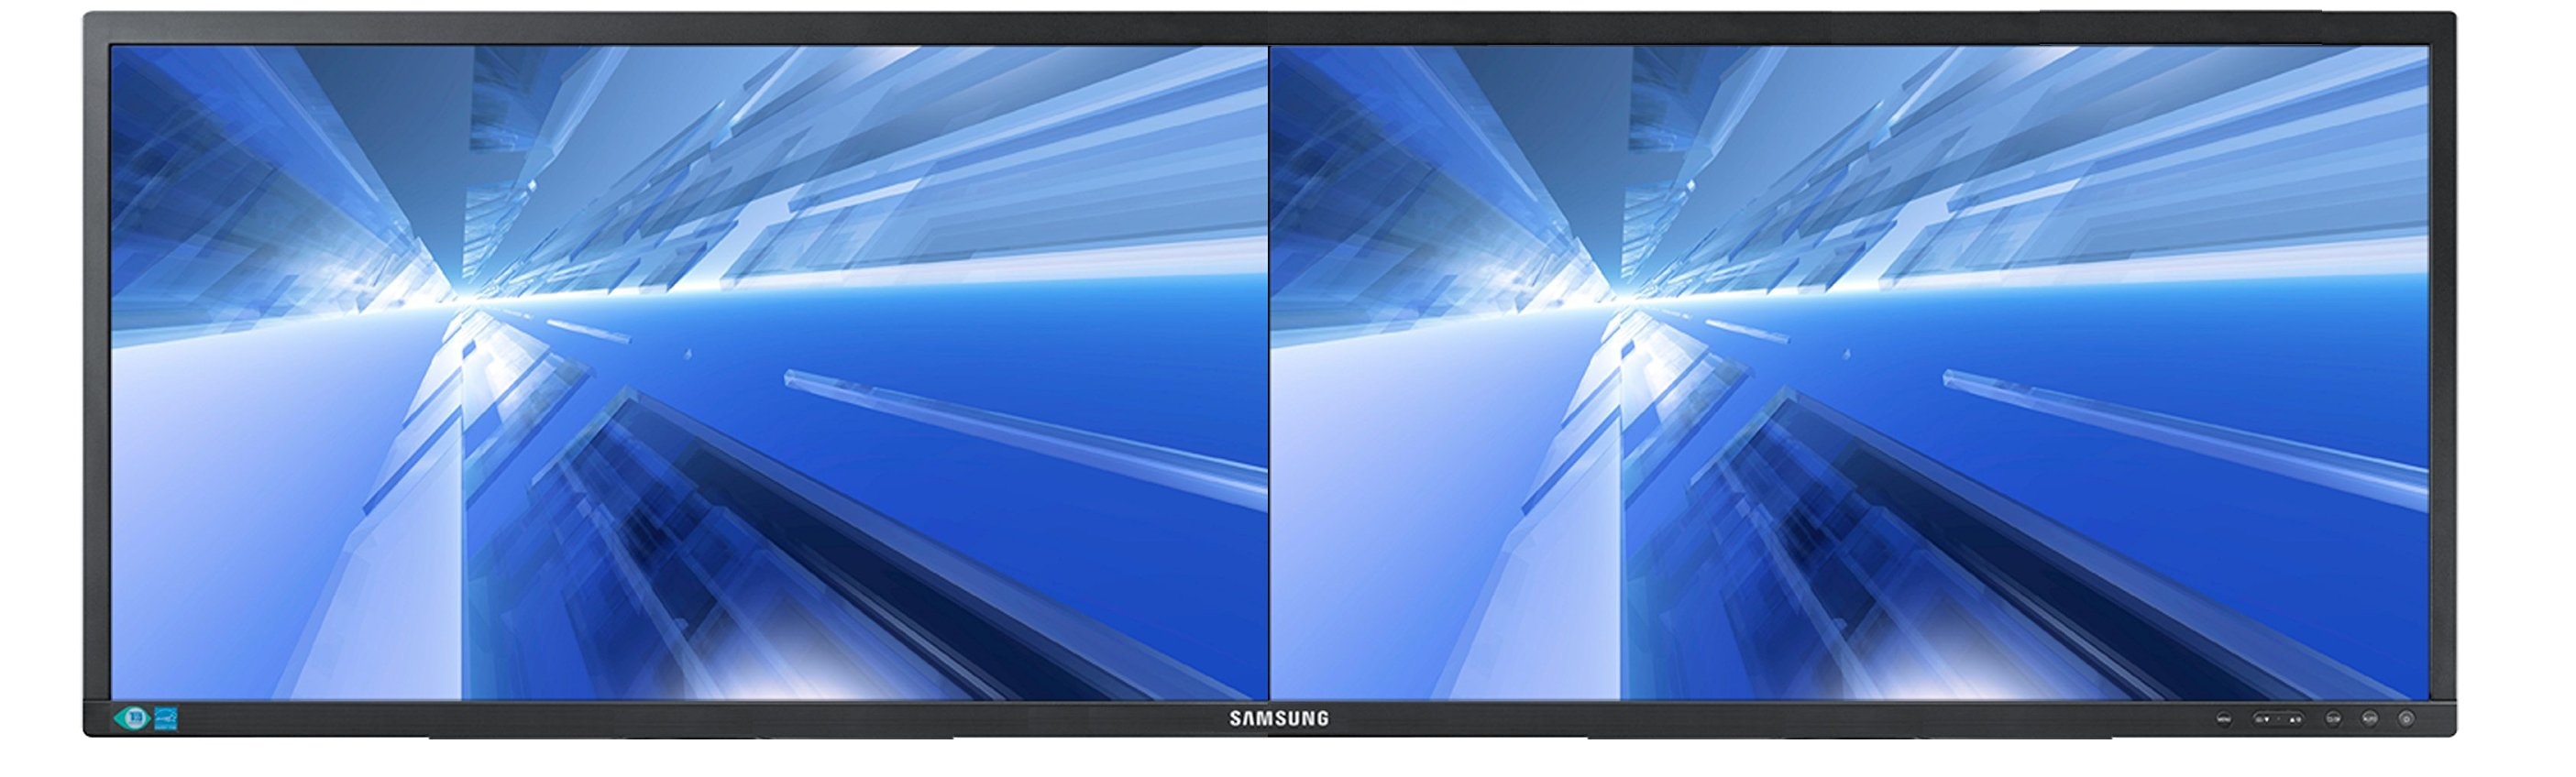 Samsung Investing In 3840x1080 And 3840x10 Curved Displays At 144 Hz